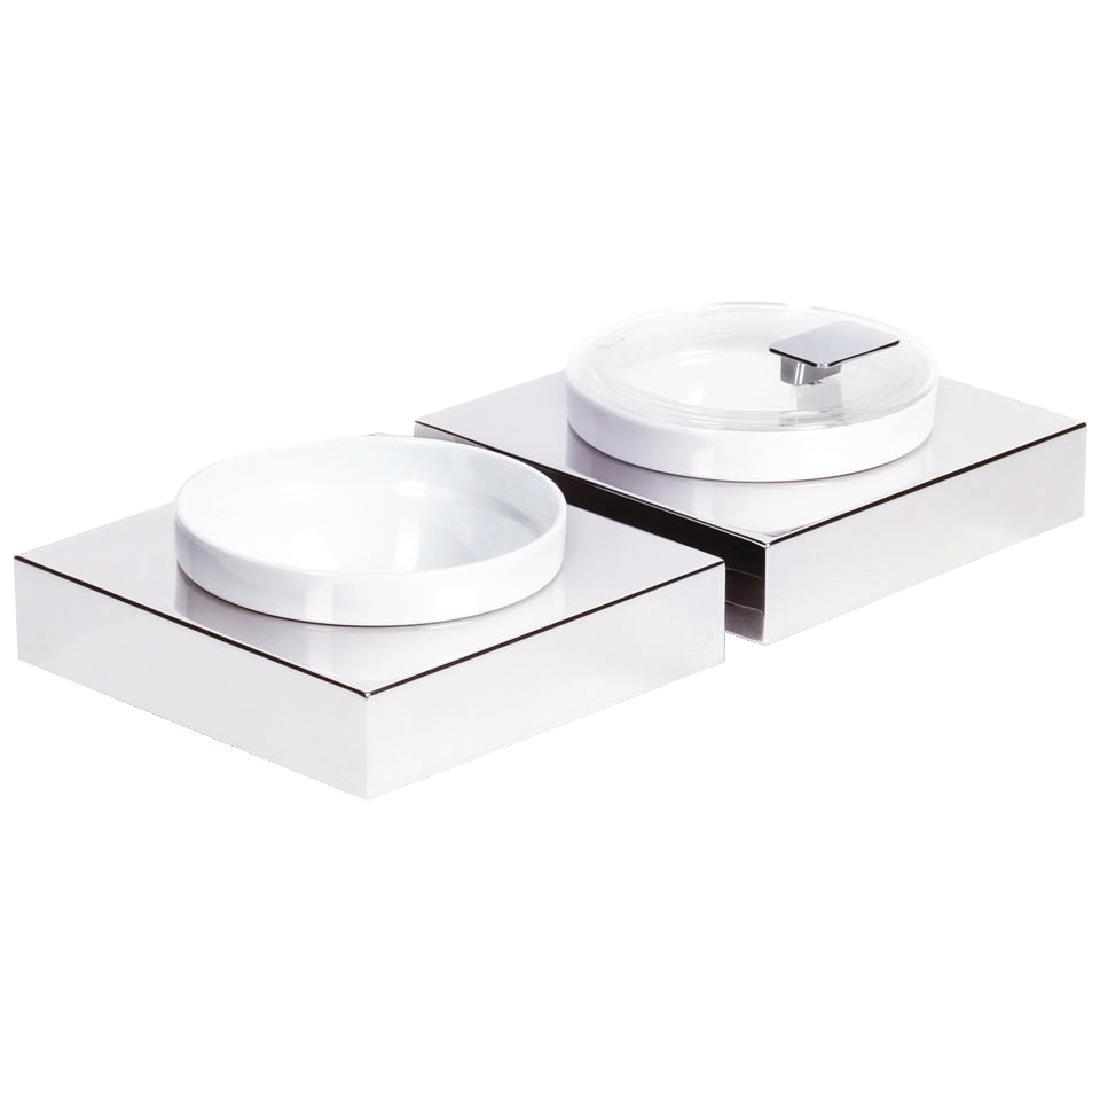 APS Frames Stainless Steel Small Square Buffet Bowl Box - Each - GC922 - 1